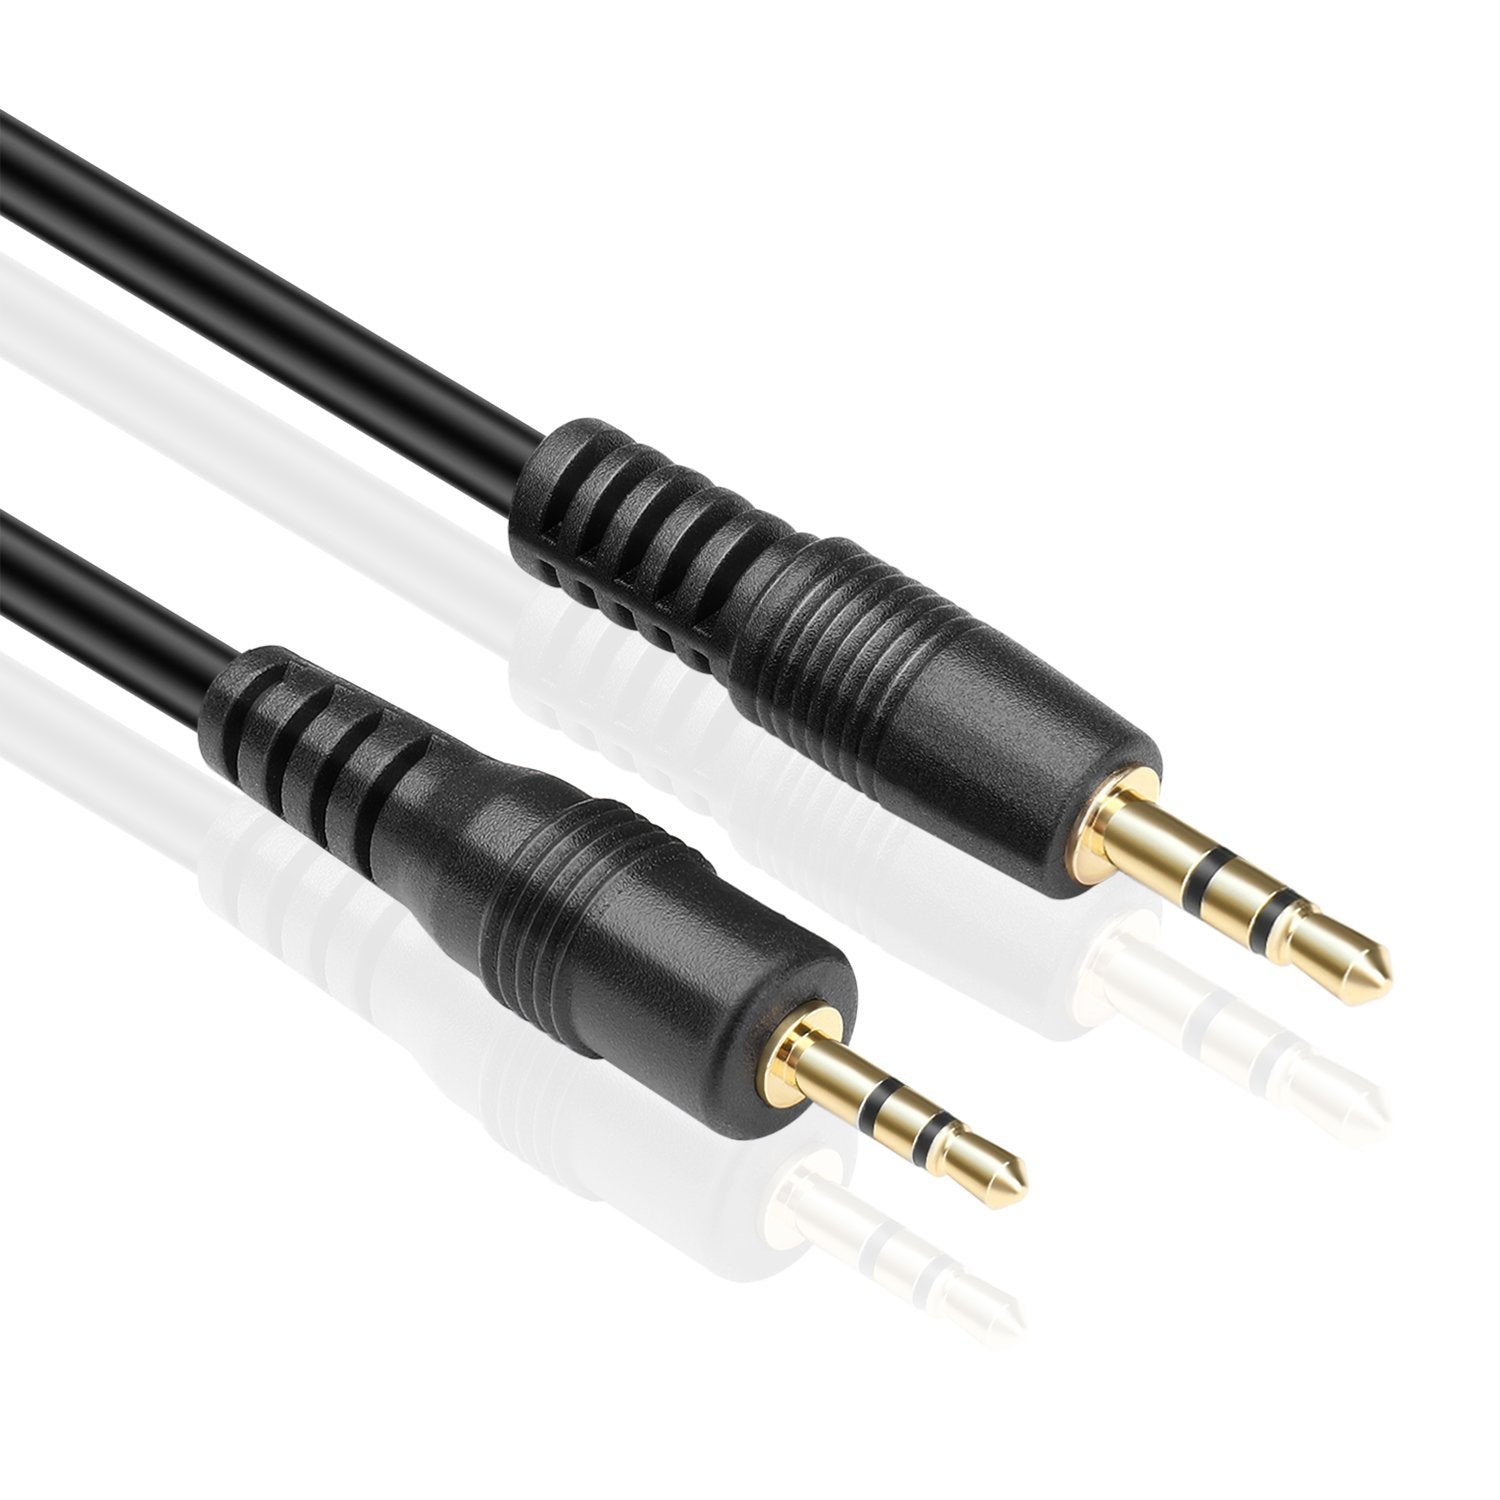 Gen iMax Audio Cable 3.5mm